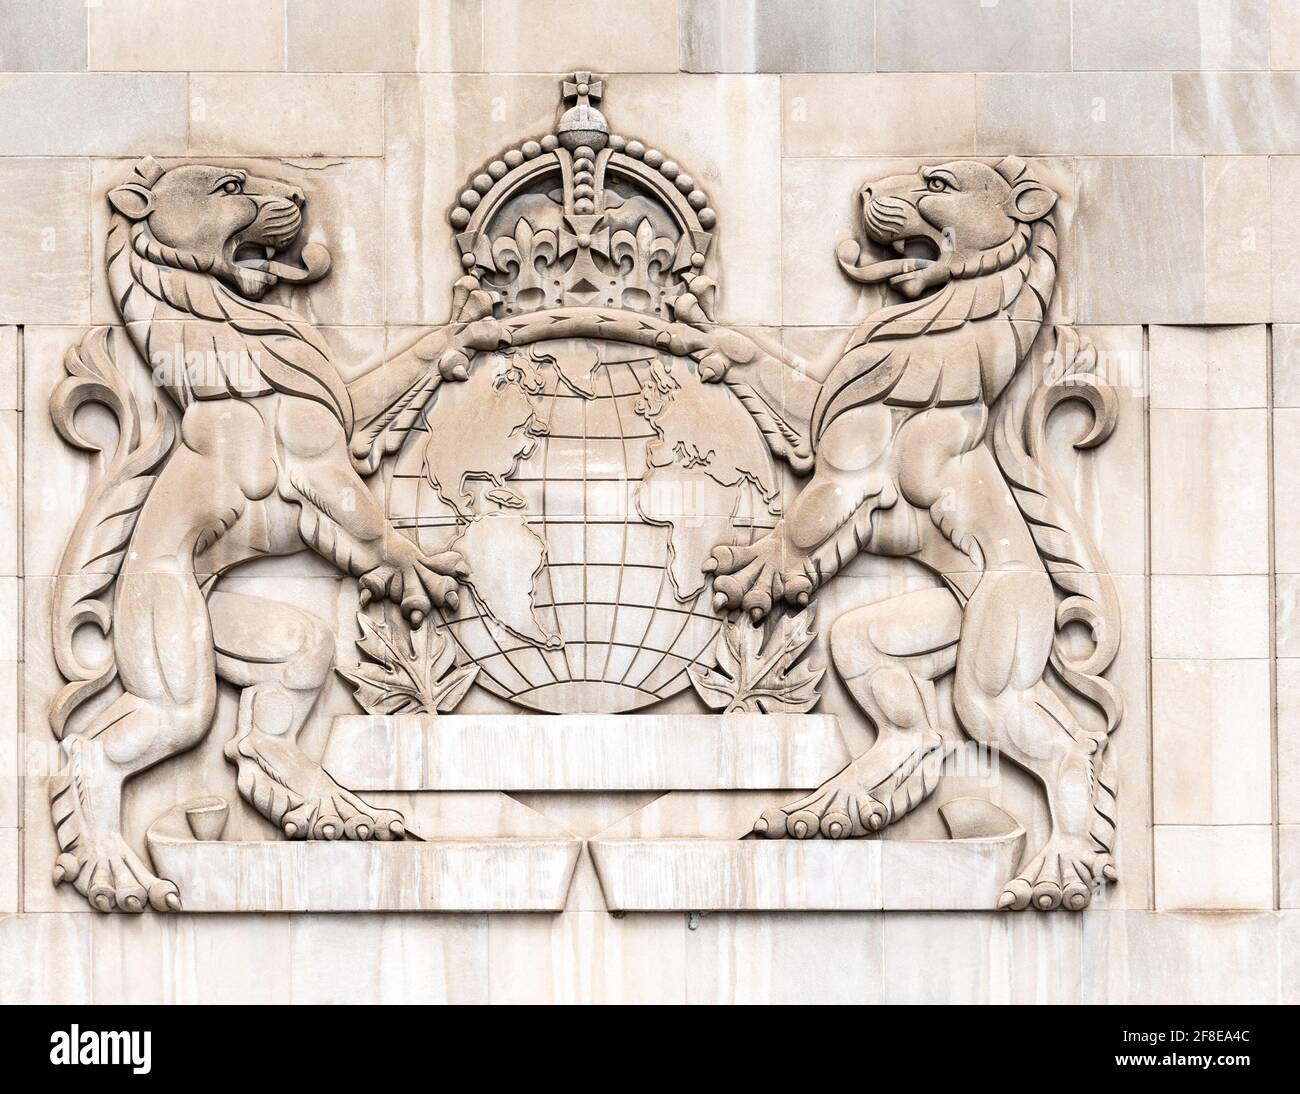 Coat of arms with lions in Bloor Street, Toronto, Canada Stock Photo